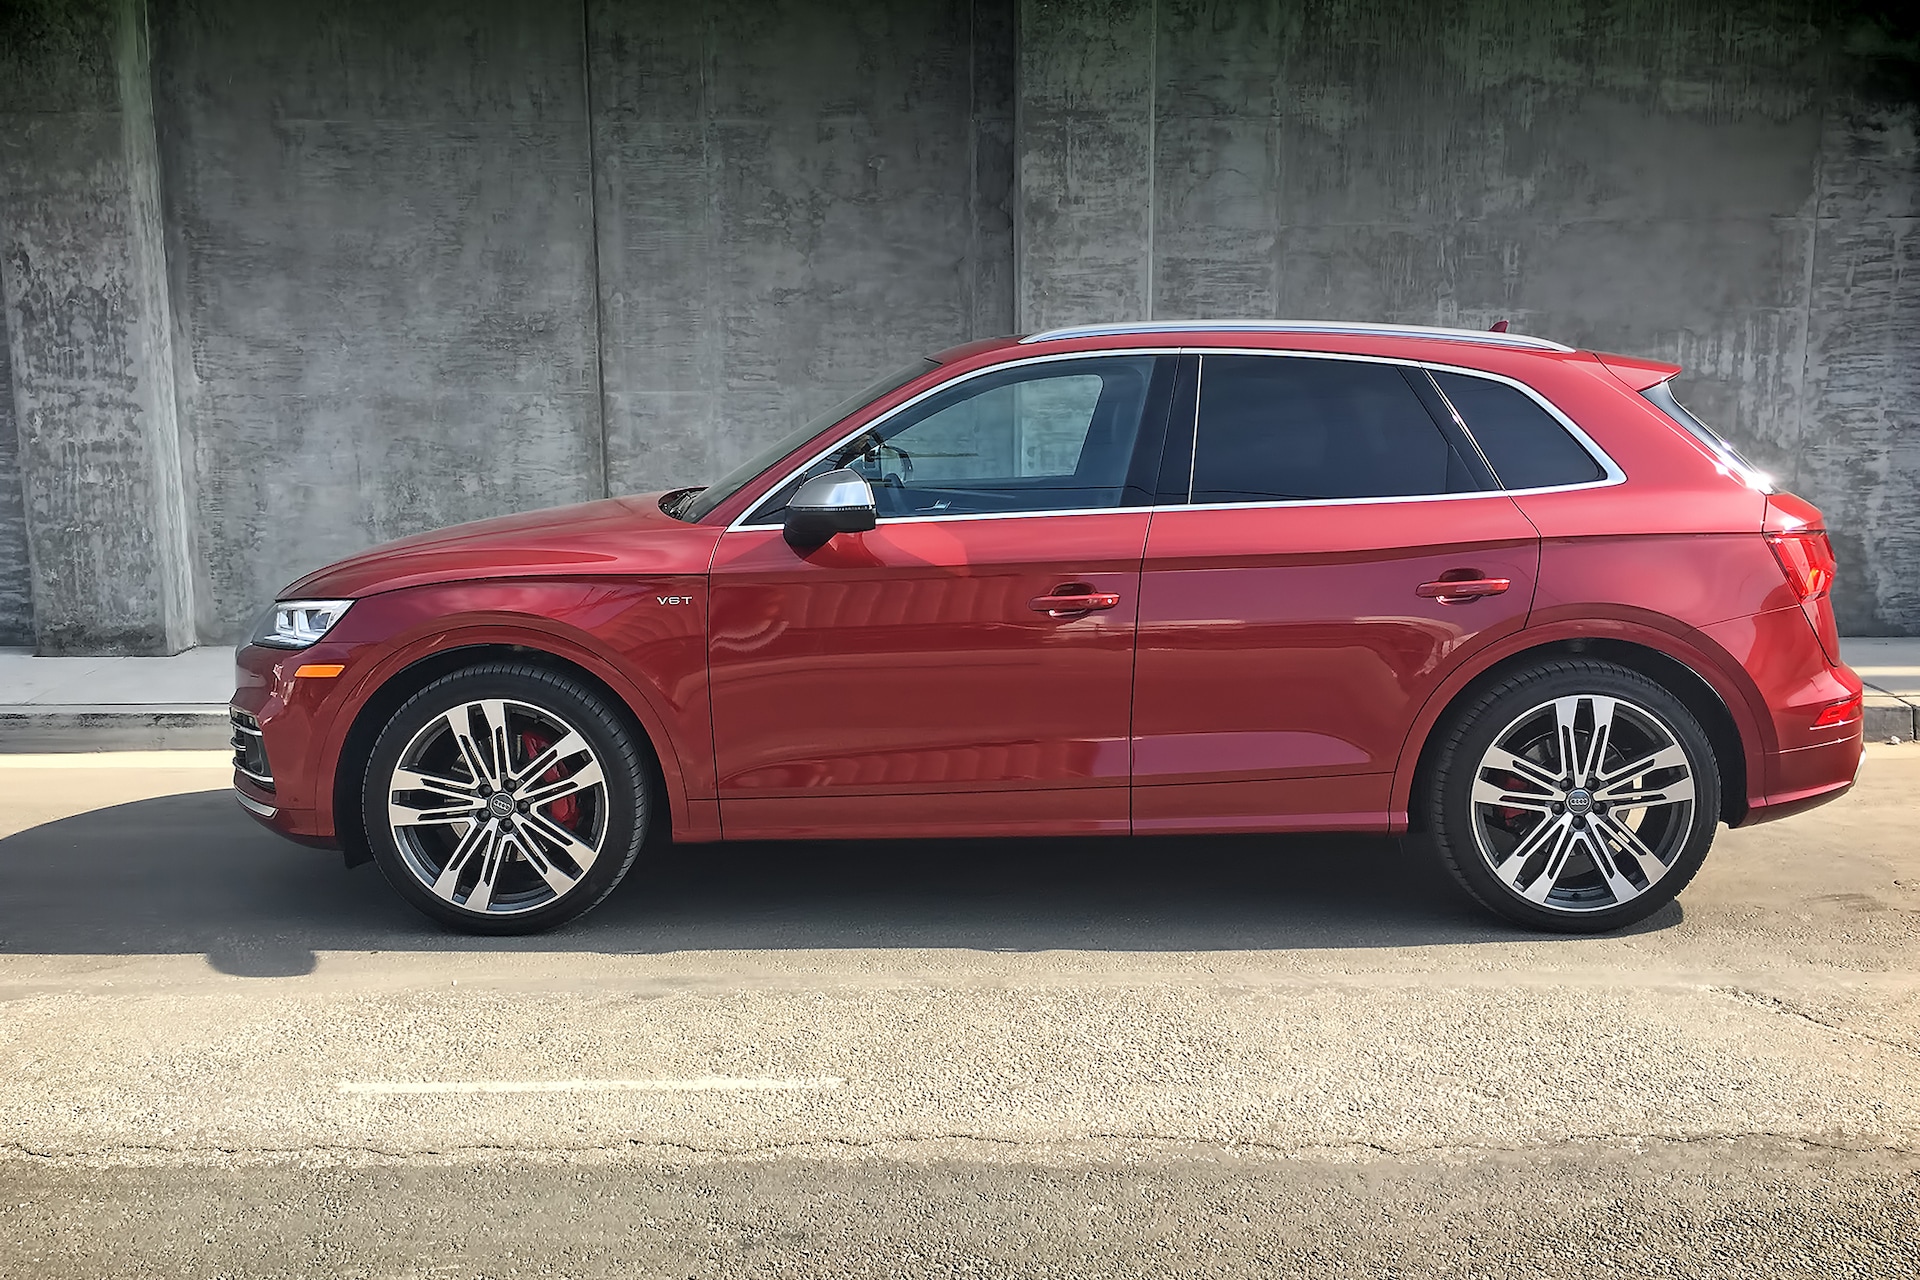 The Audi SQ5 Is Sporty, Sumptuous, and Strong